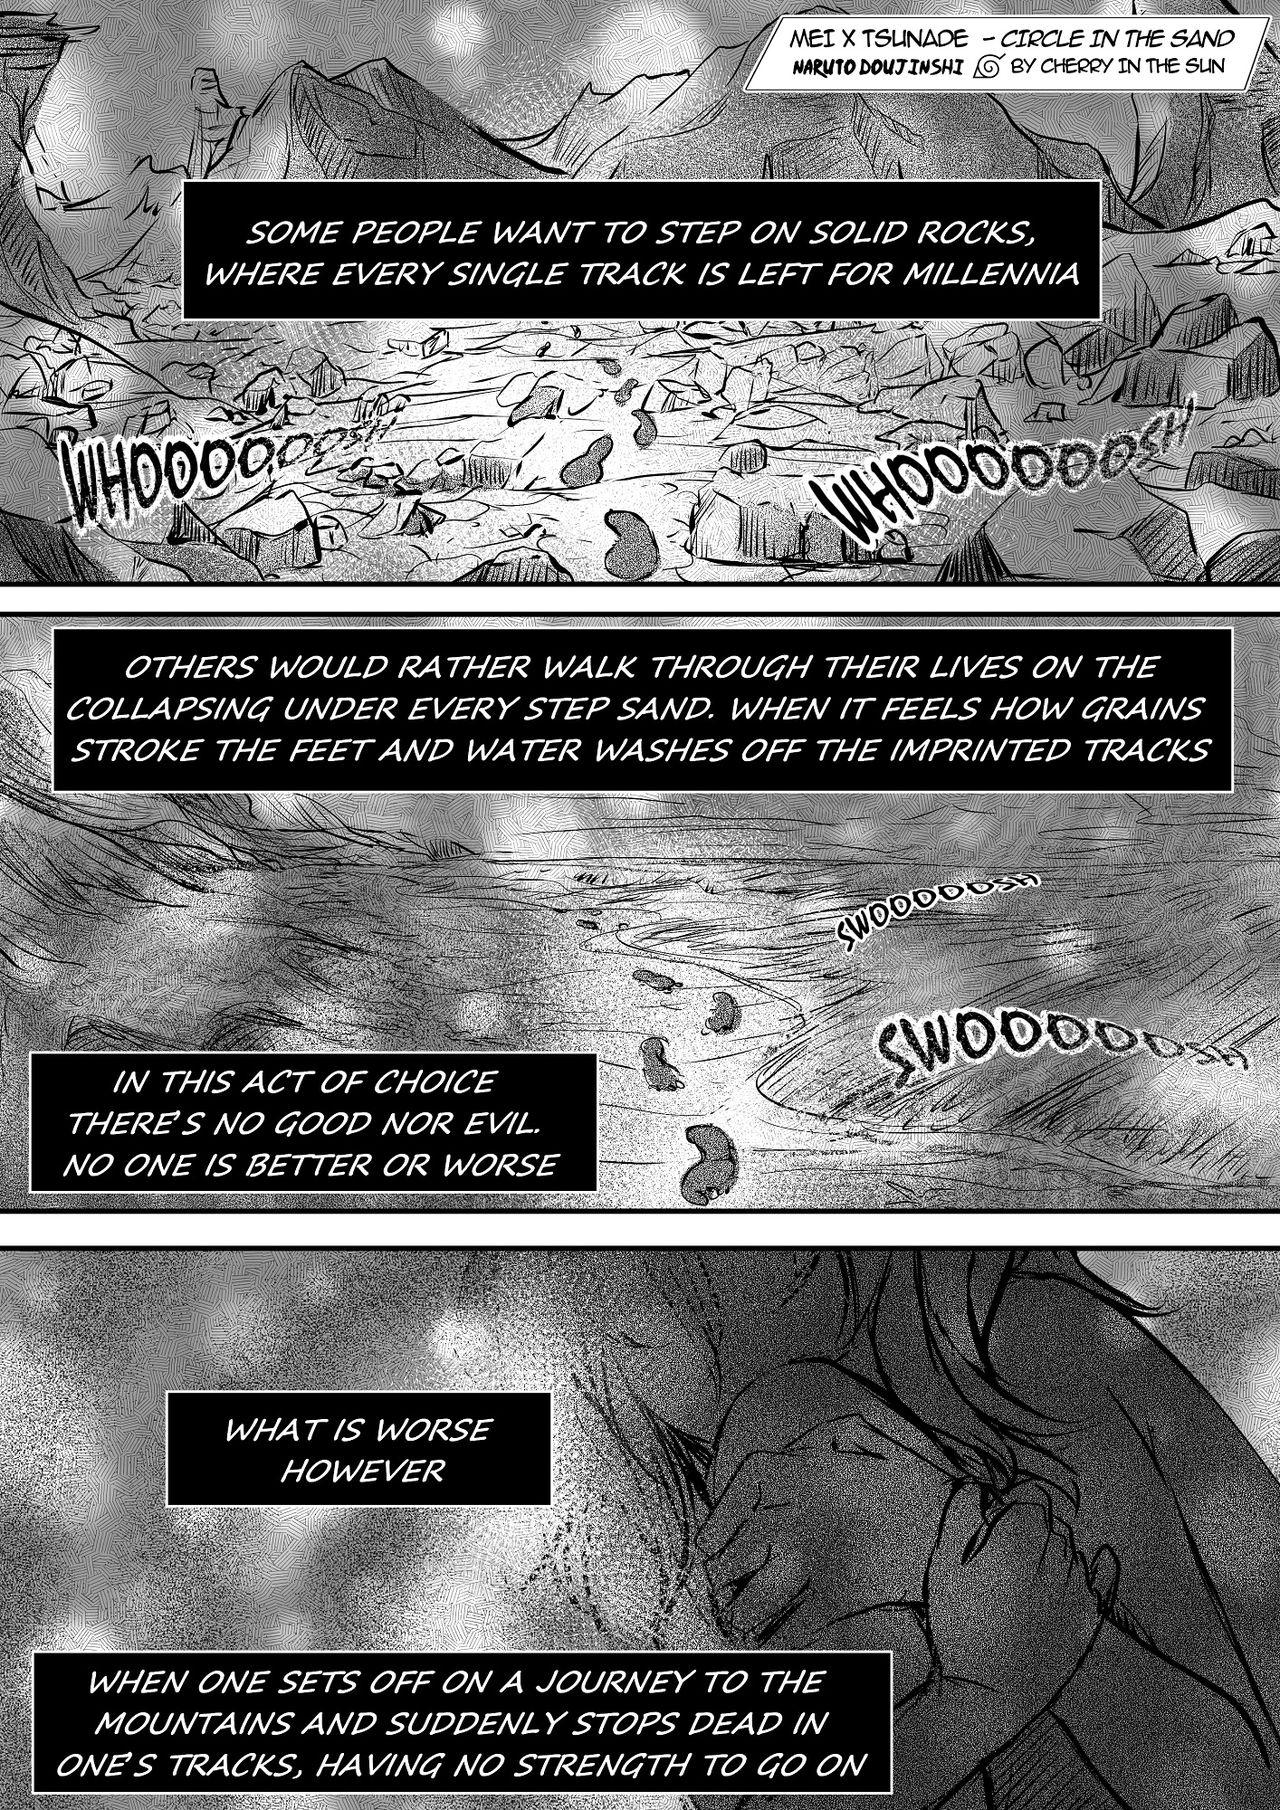 Cavala Circle in the Sand - Naruto Blowjob Contest - Page 2